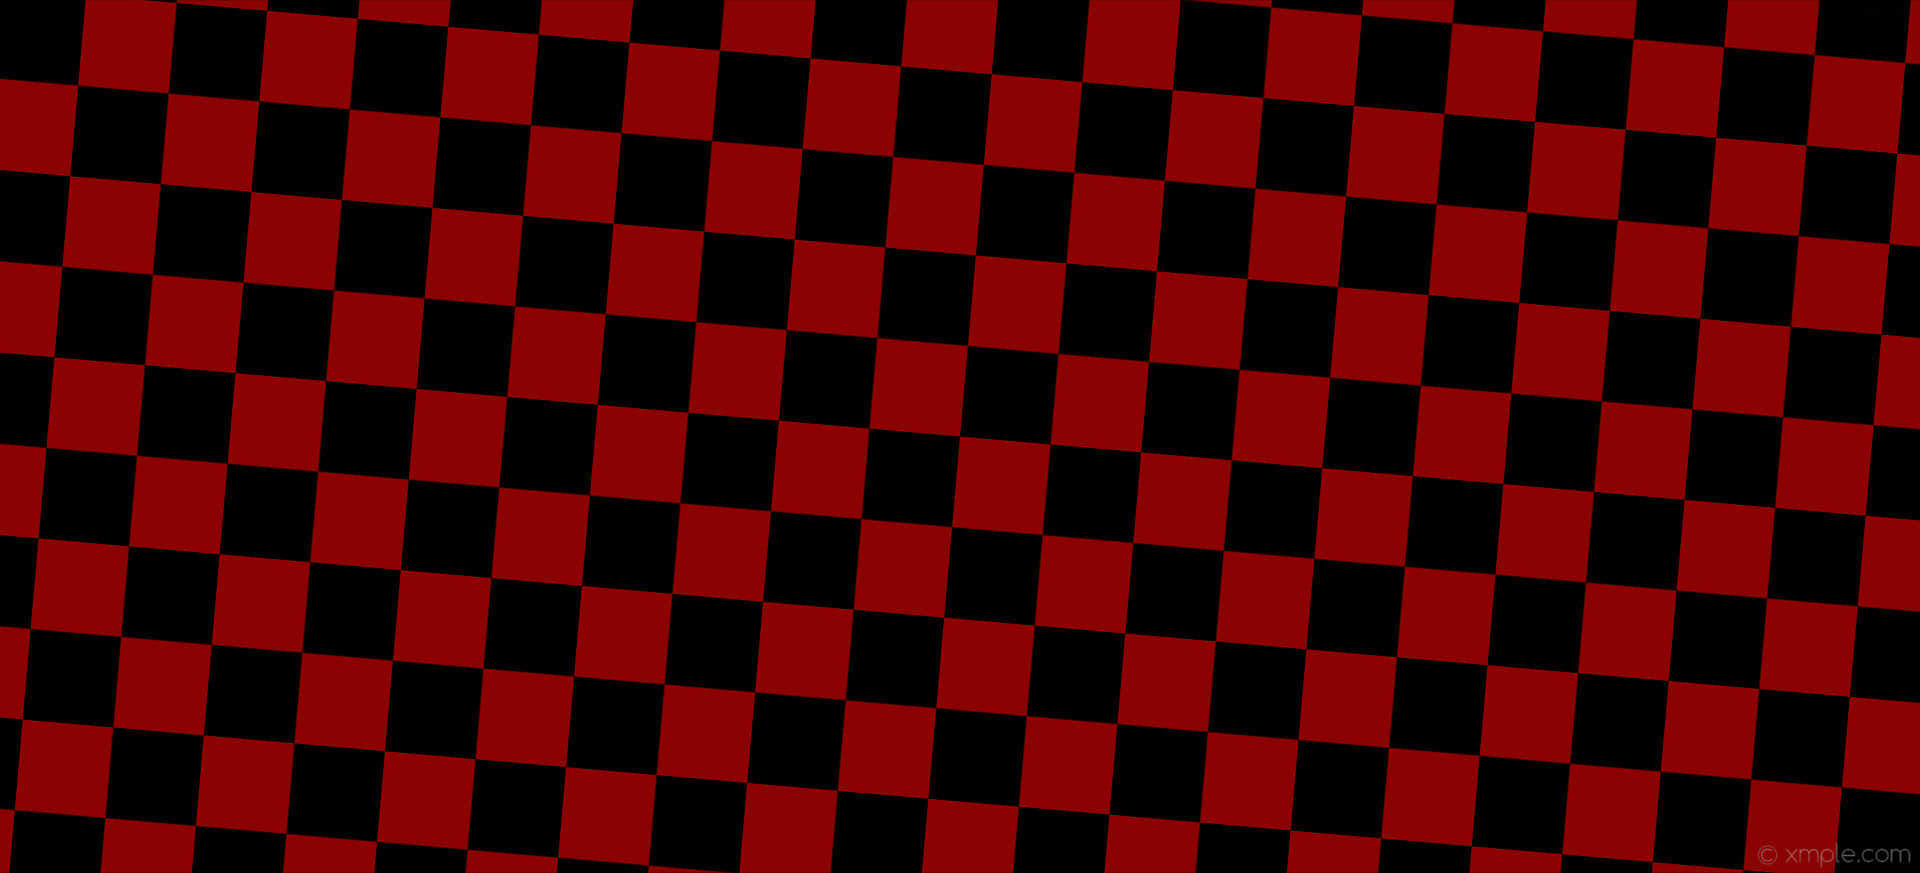 Stylish Red and Black Plaid Wallpaper